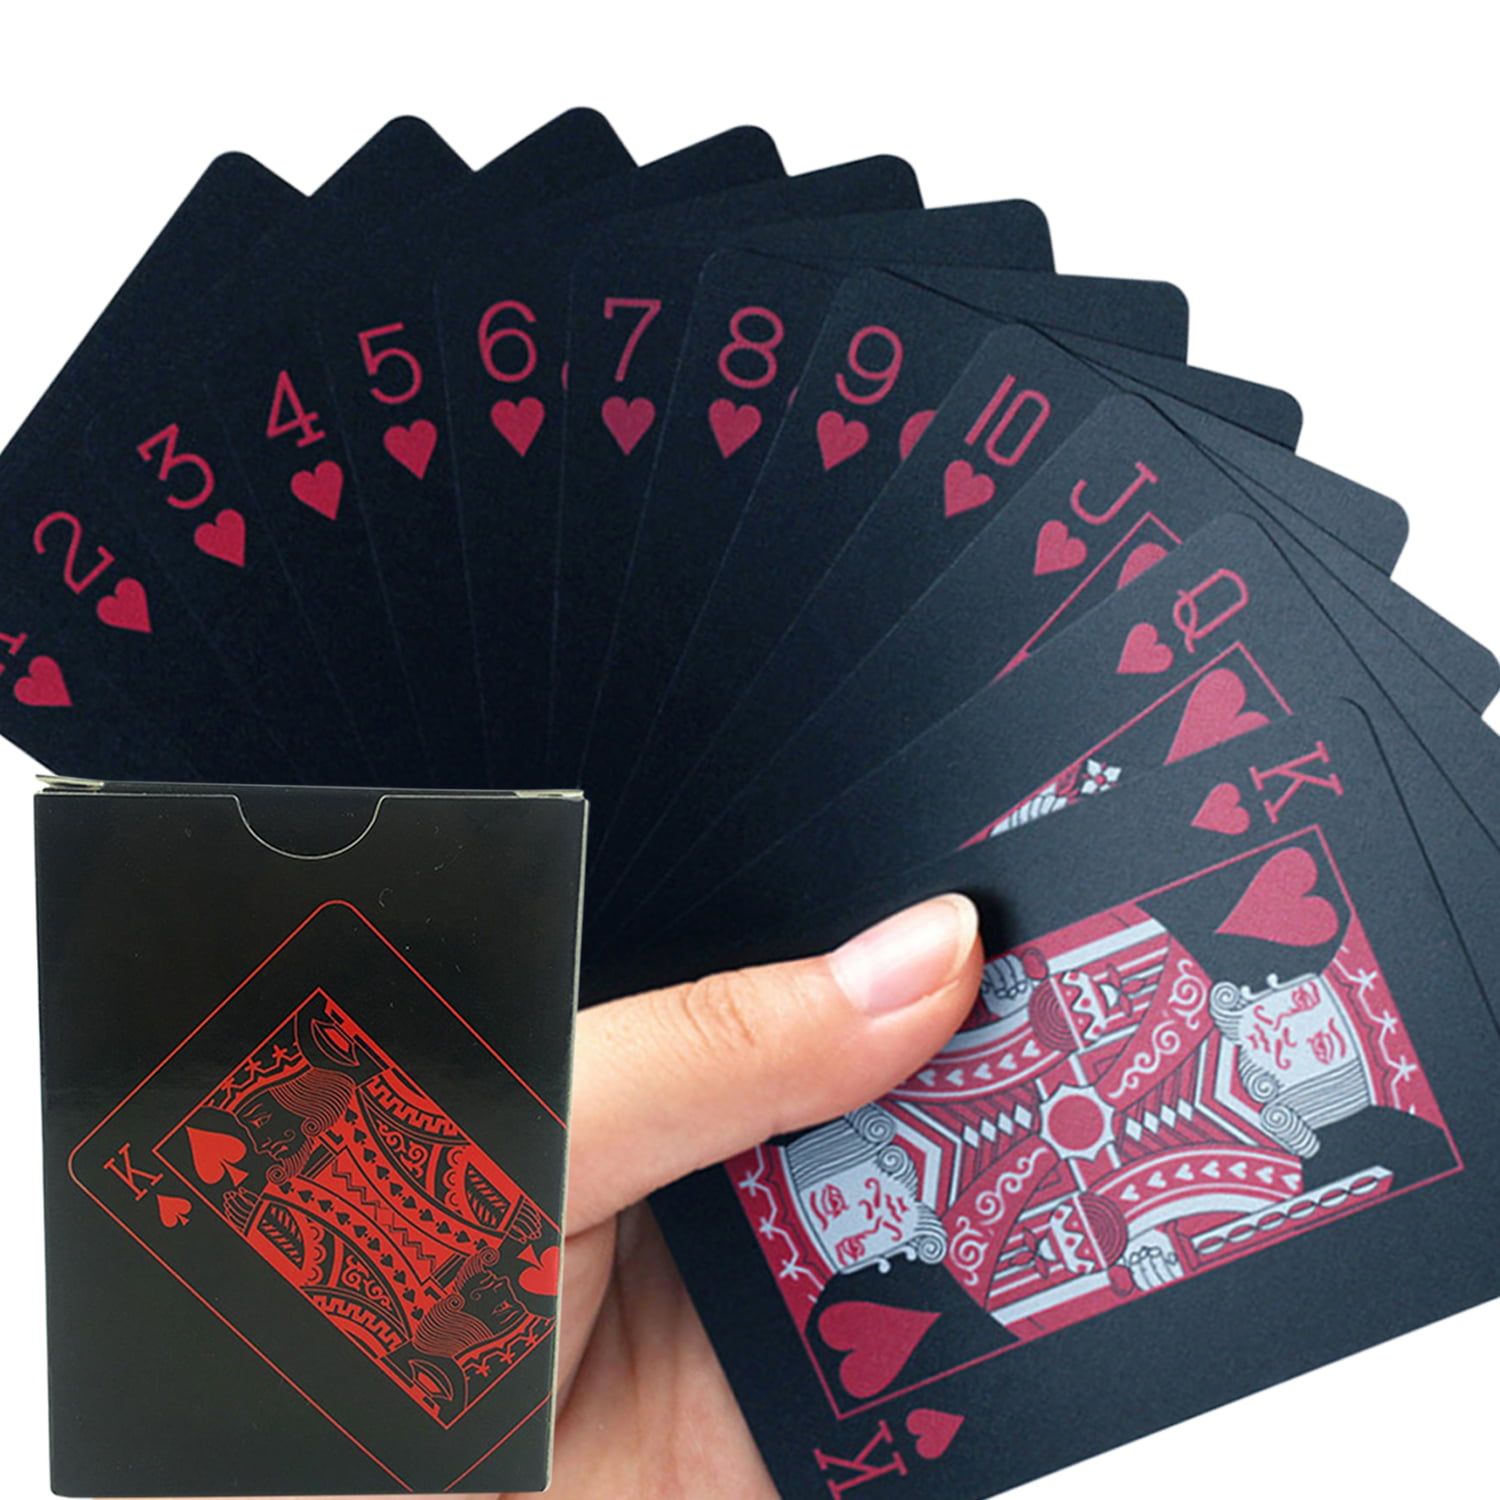 New Waterproof Black Red Playing Cards PVC Poker Casino Creative Durable Game 